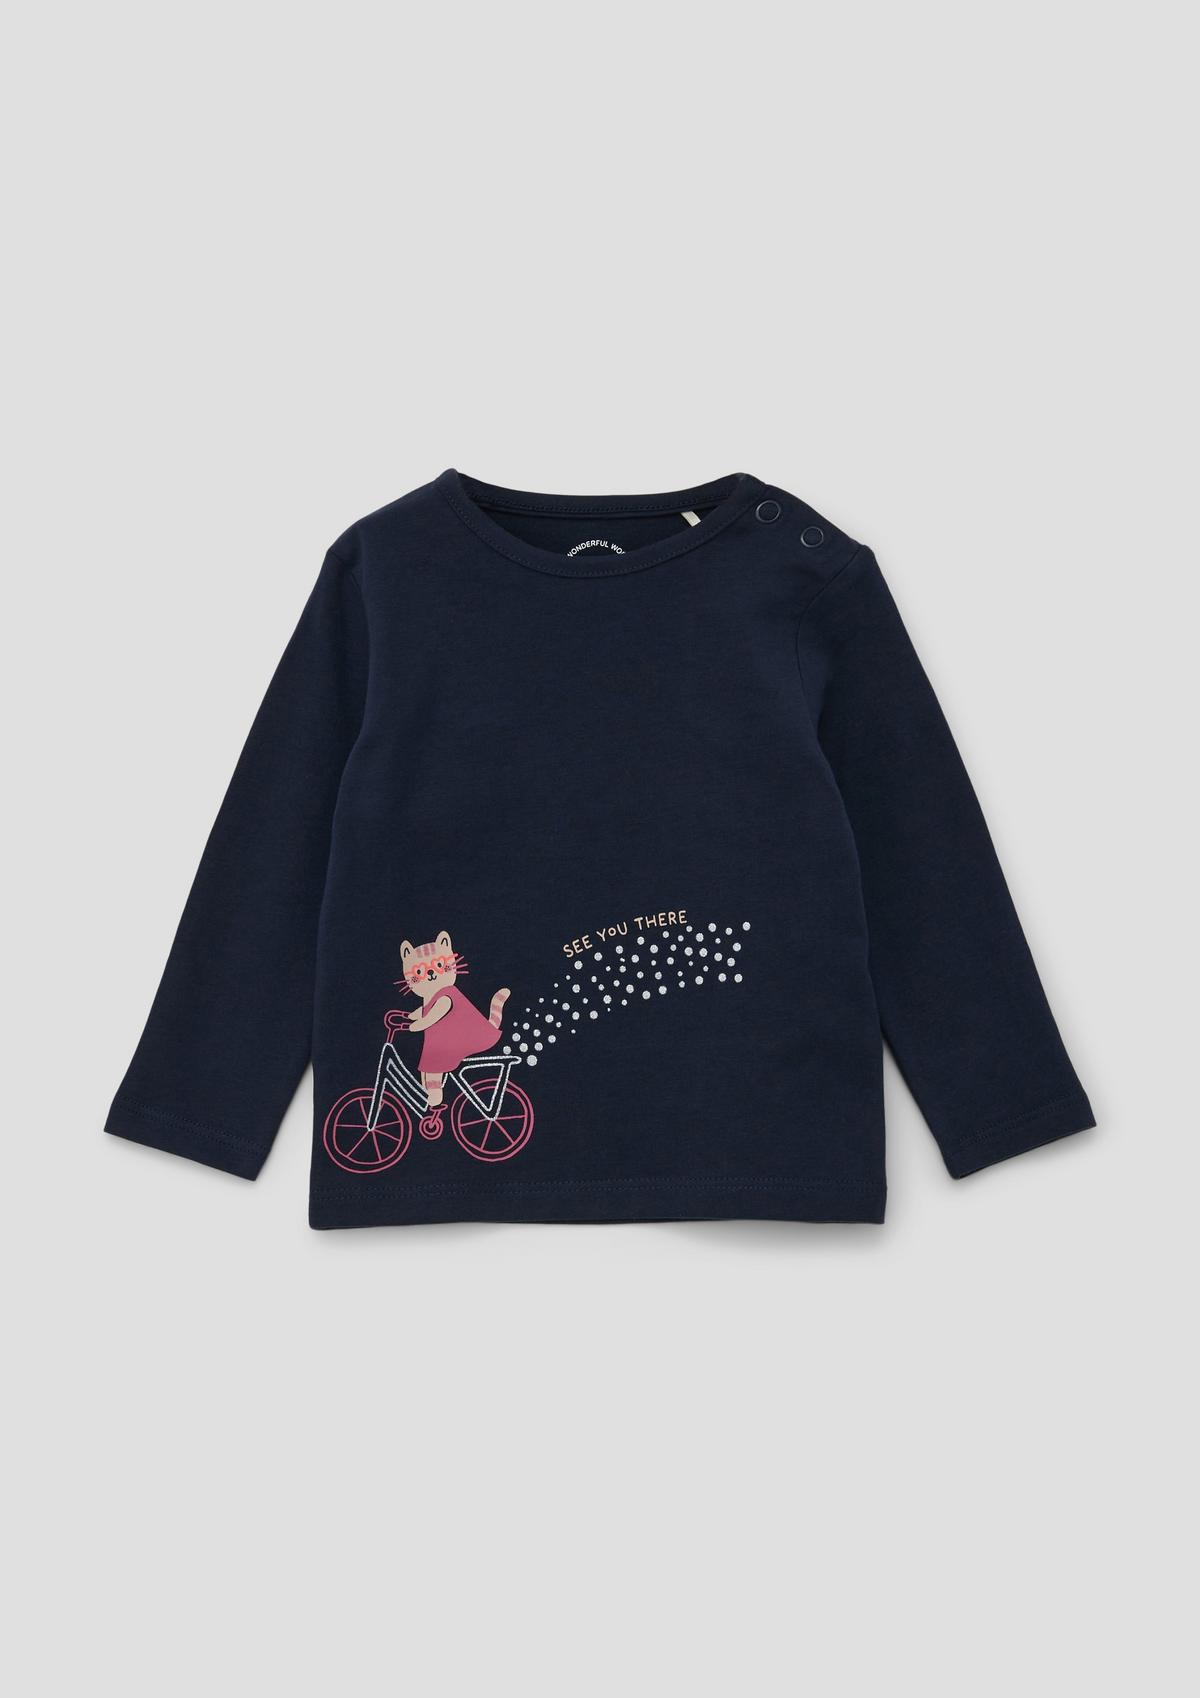 s.Oliver Long sleeve top with a glittering effect print